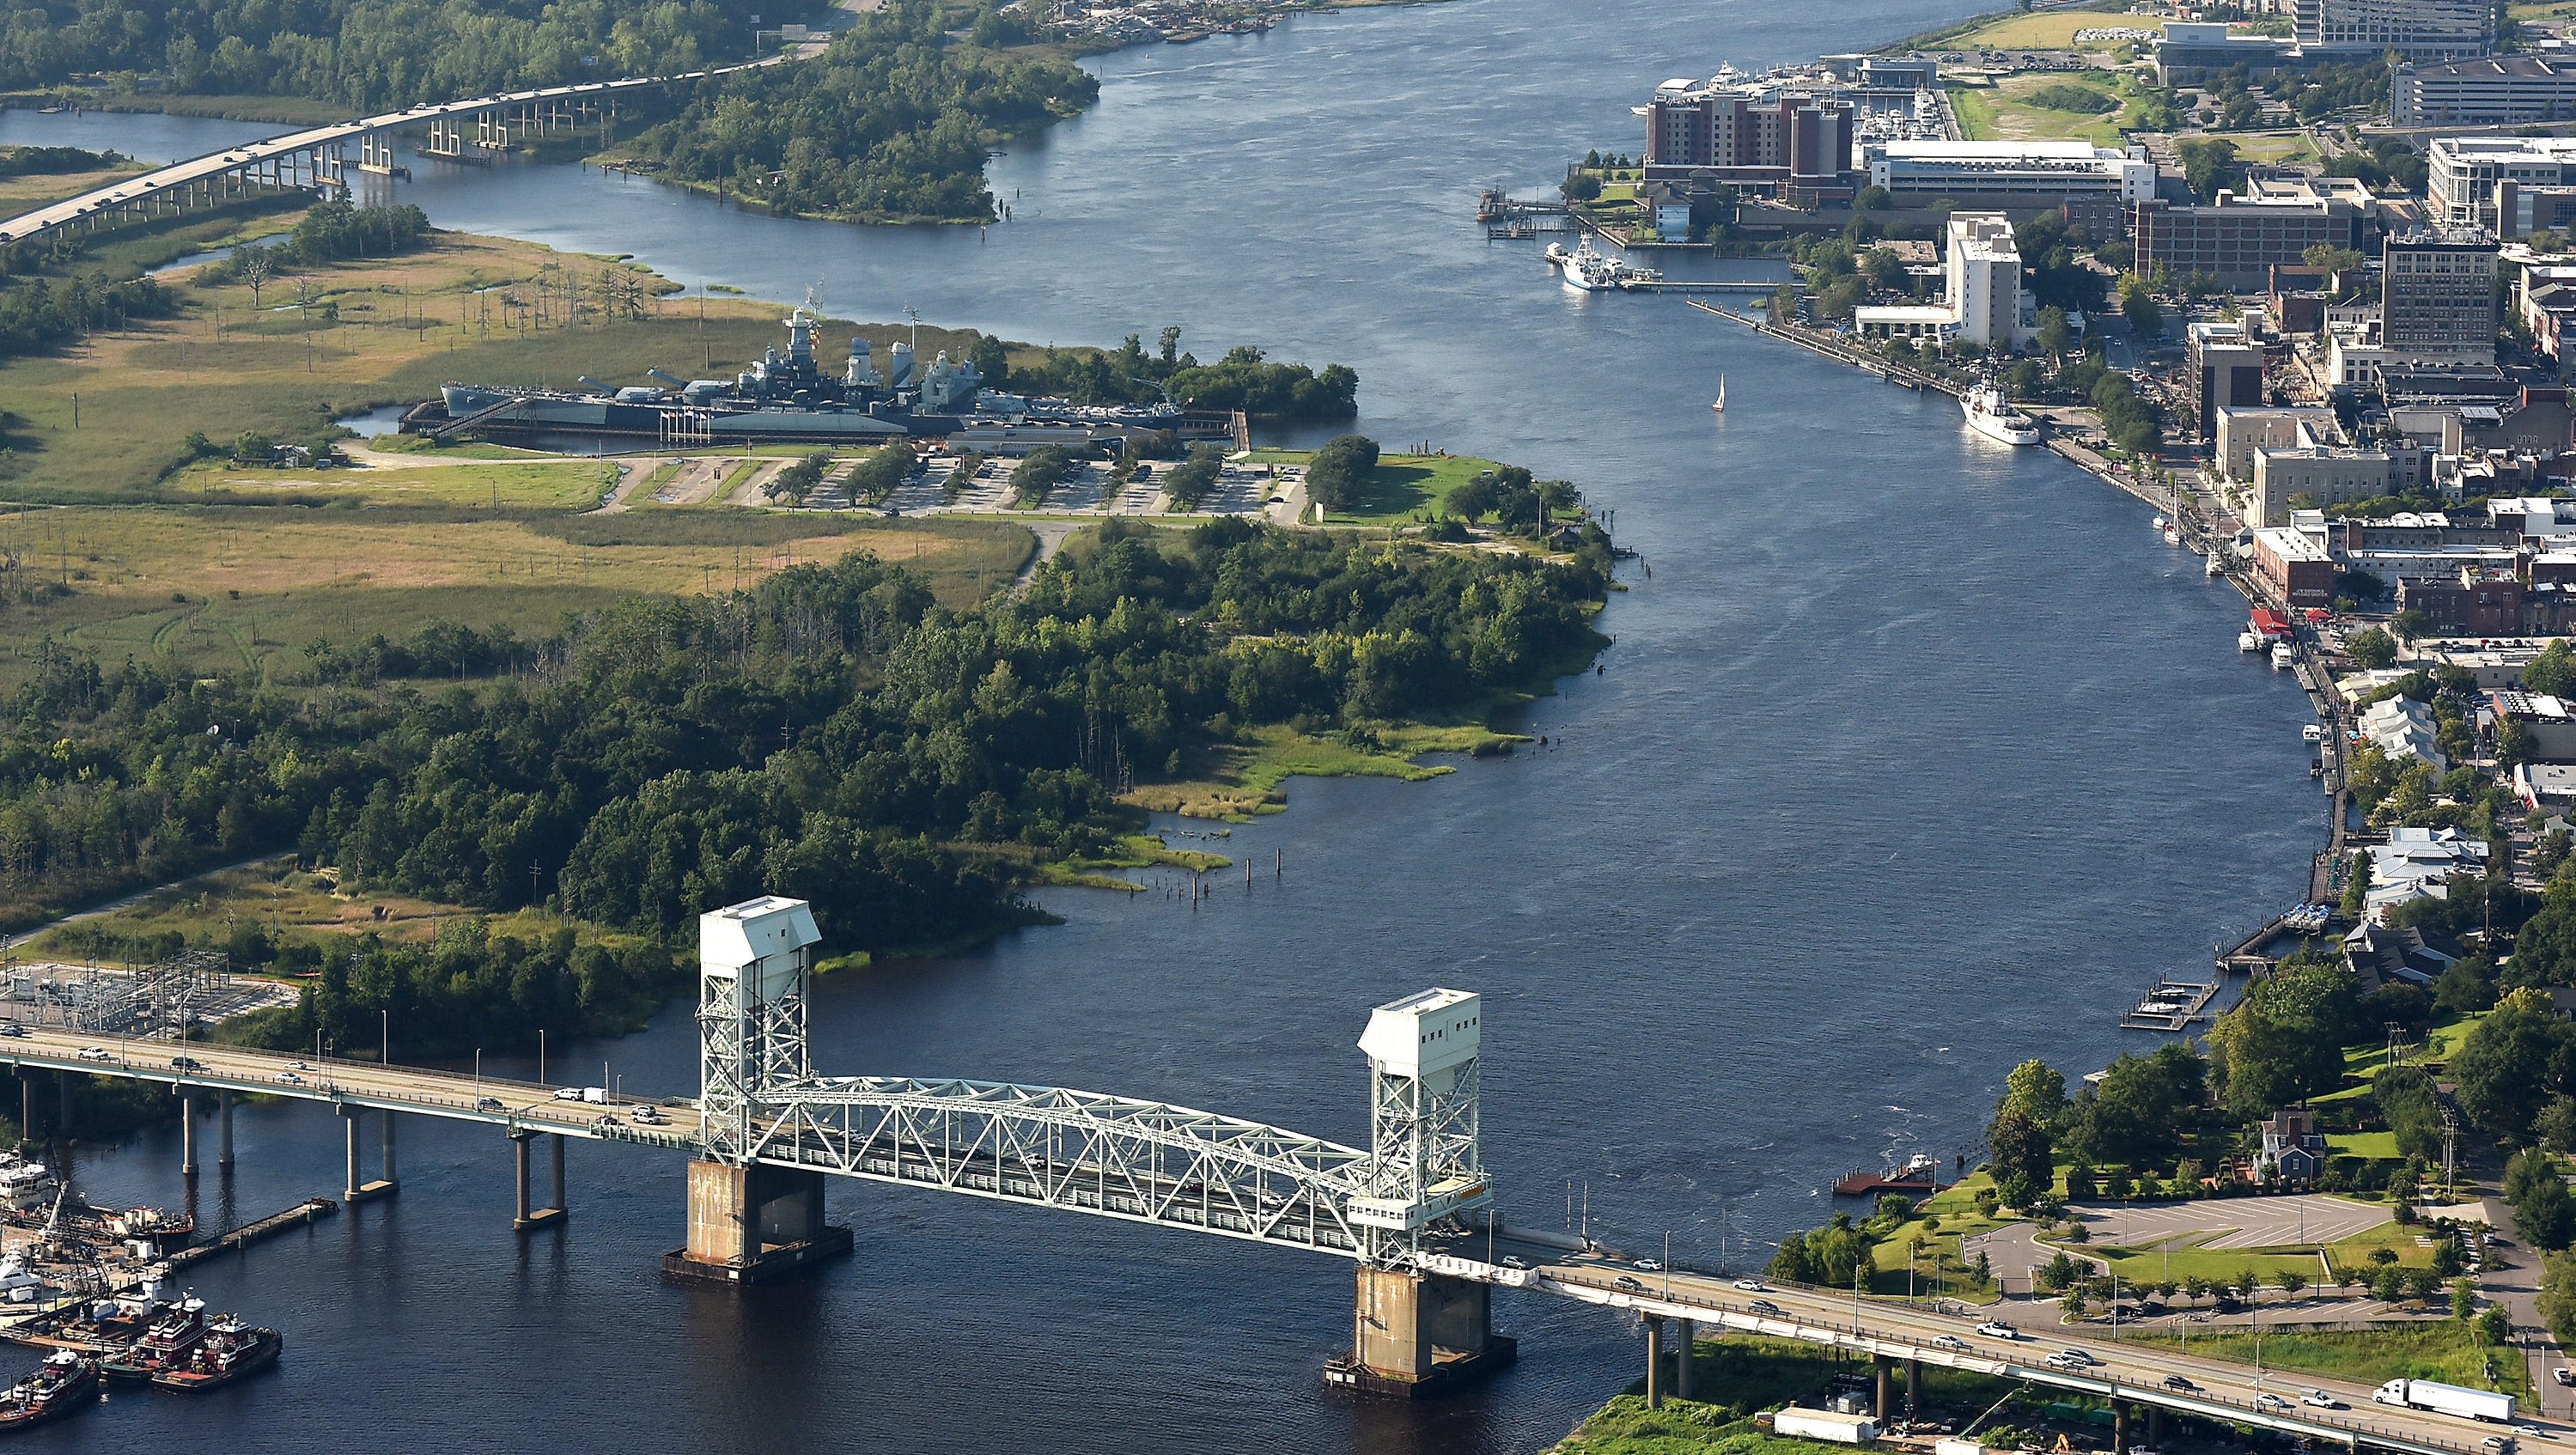 Millions awarded to help fund replacement of Cape Fear Memorial Bridge